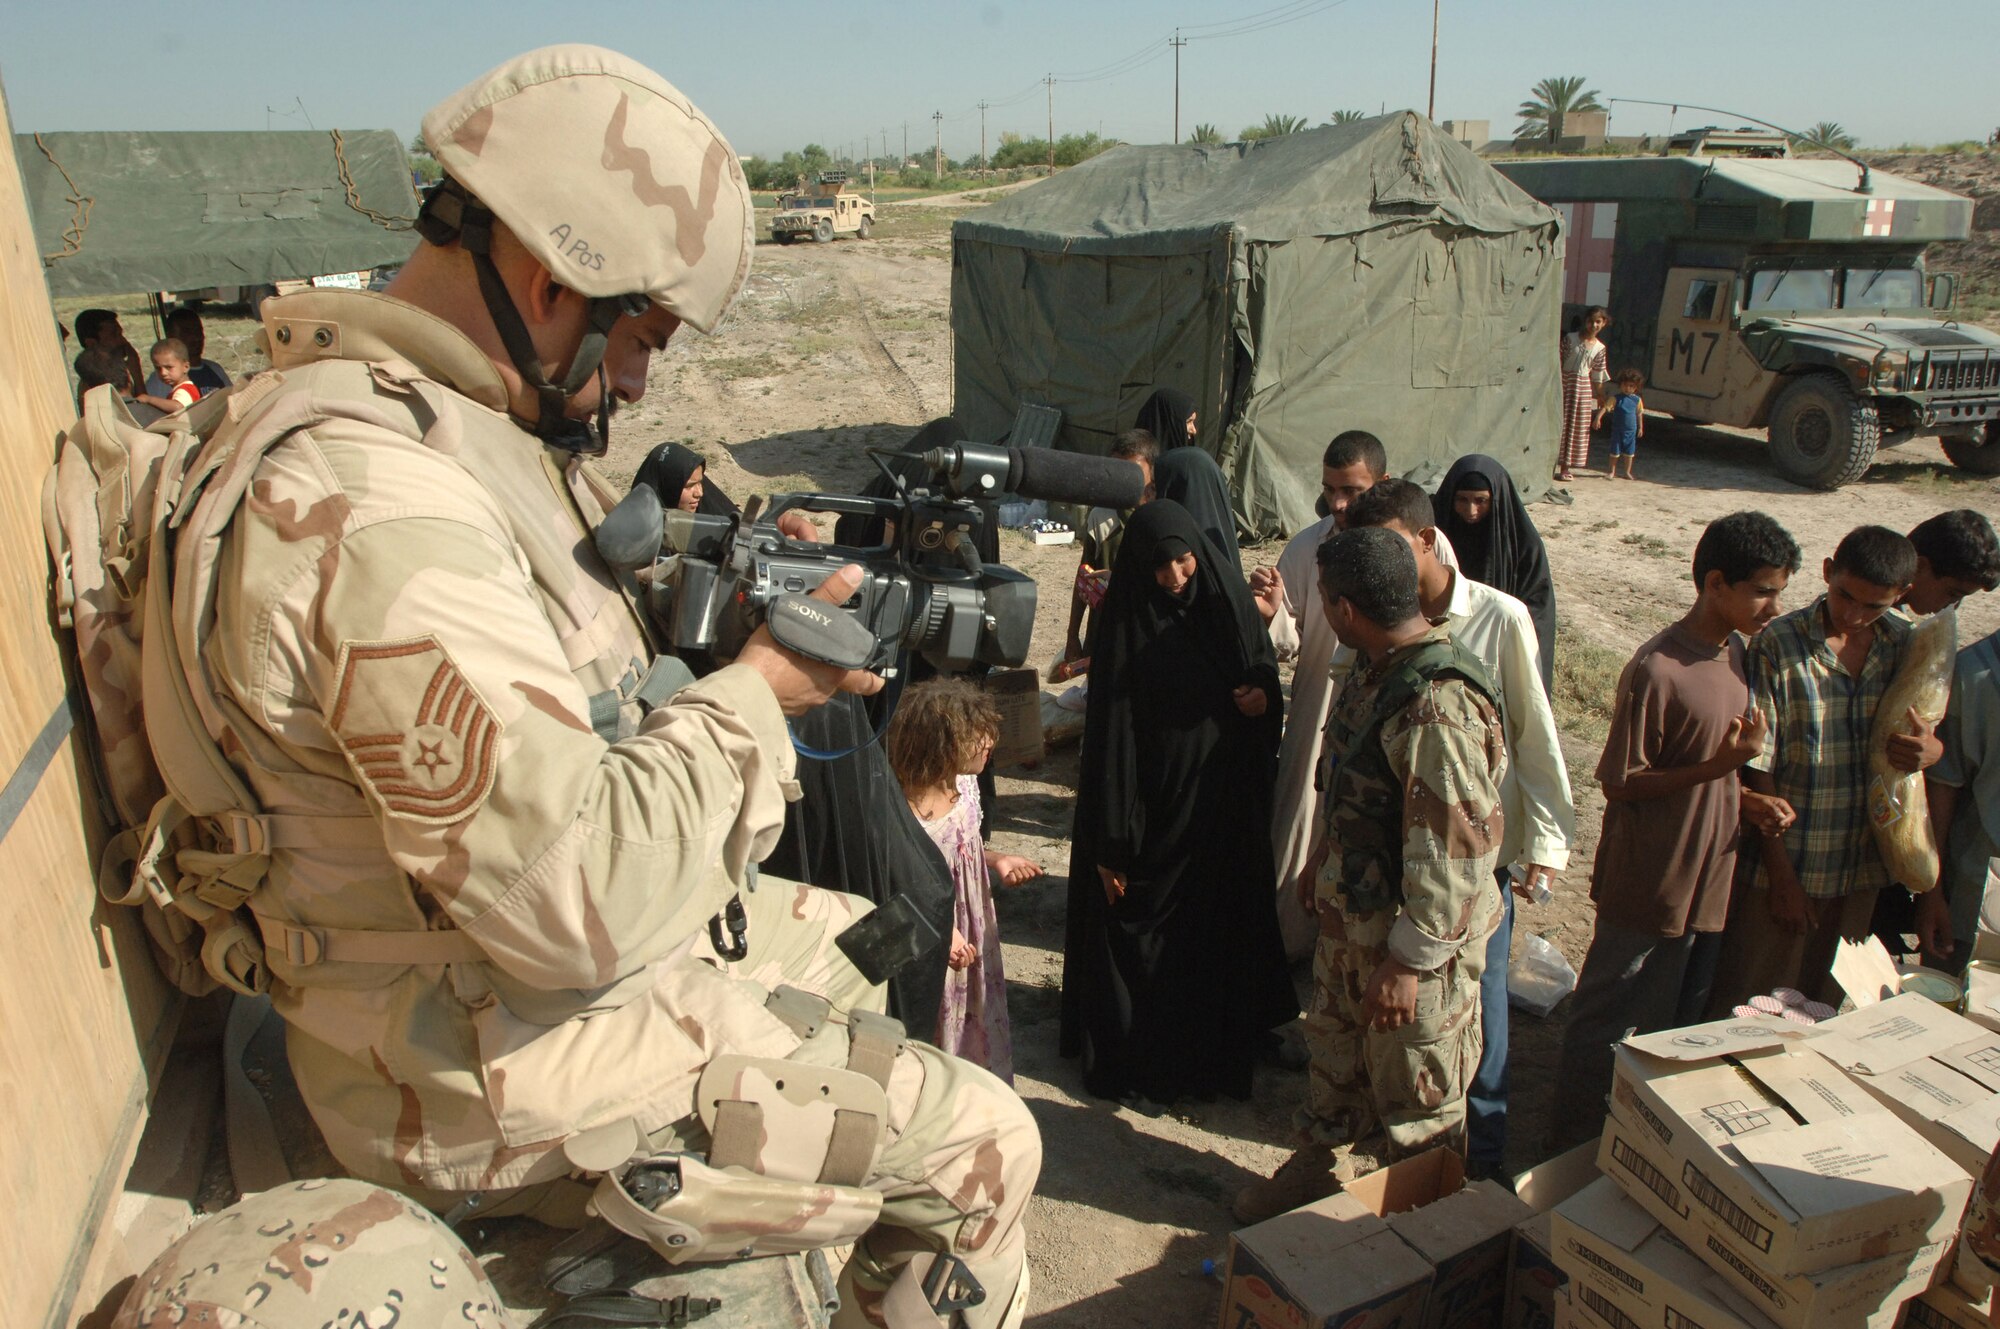 Master Sgt. Christopher Nolan videotapes Iraqi soldiers handing out food, toys and blankets to Iraqi citizens during an Army exercise conducted in Baghdad, Iraq, on Saturday, June 24. Sergeant Nolan is a combat videographer with the 1st Combat Camera Squadron at Charleston Air Force Base, S.C. (U.S. Army photo by Staff Sgt. Kevin L. Moses Sr.)

